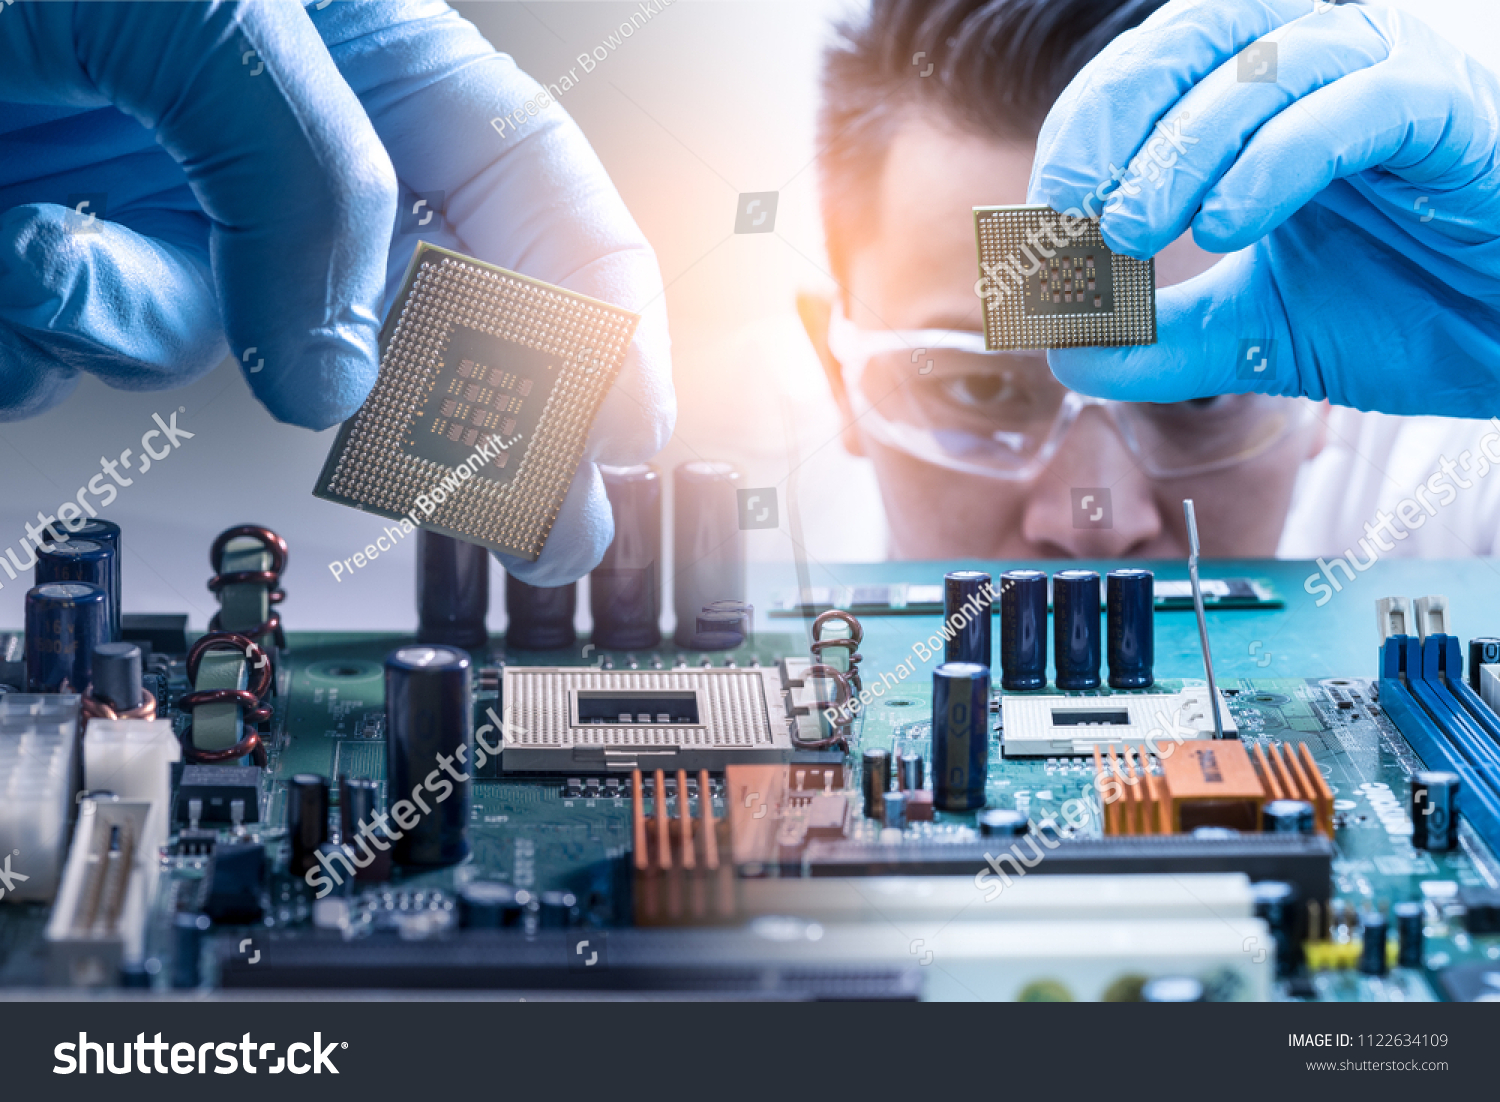 The asian technician is putting the CPU on the socket of the computer motherboard. the concept of computer hardware, repairing, upgrade and technology. #1122634109